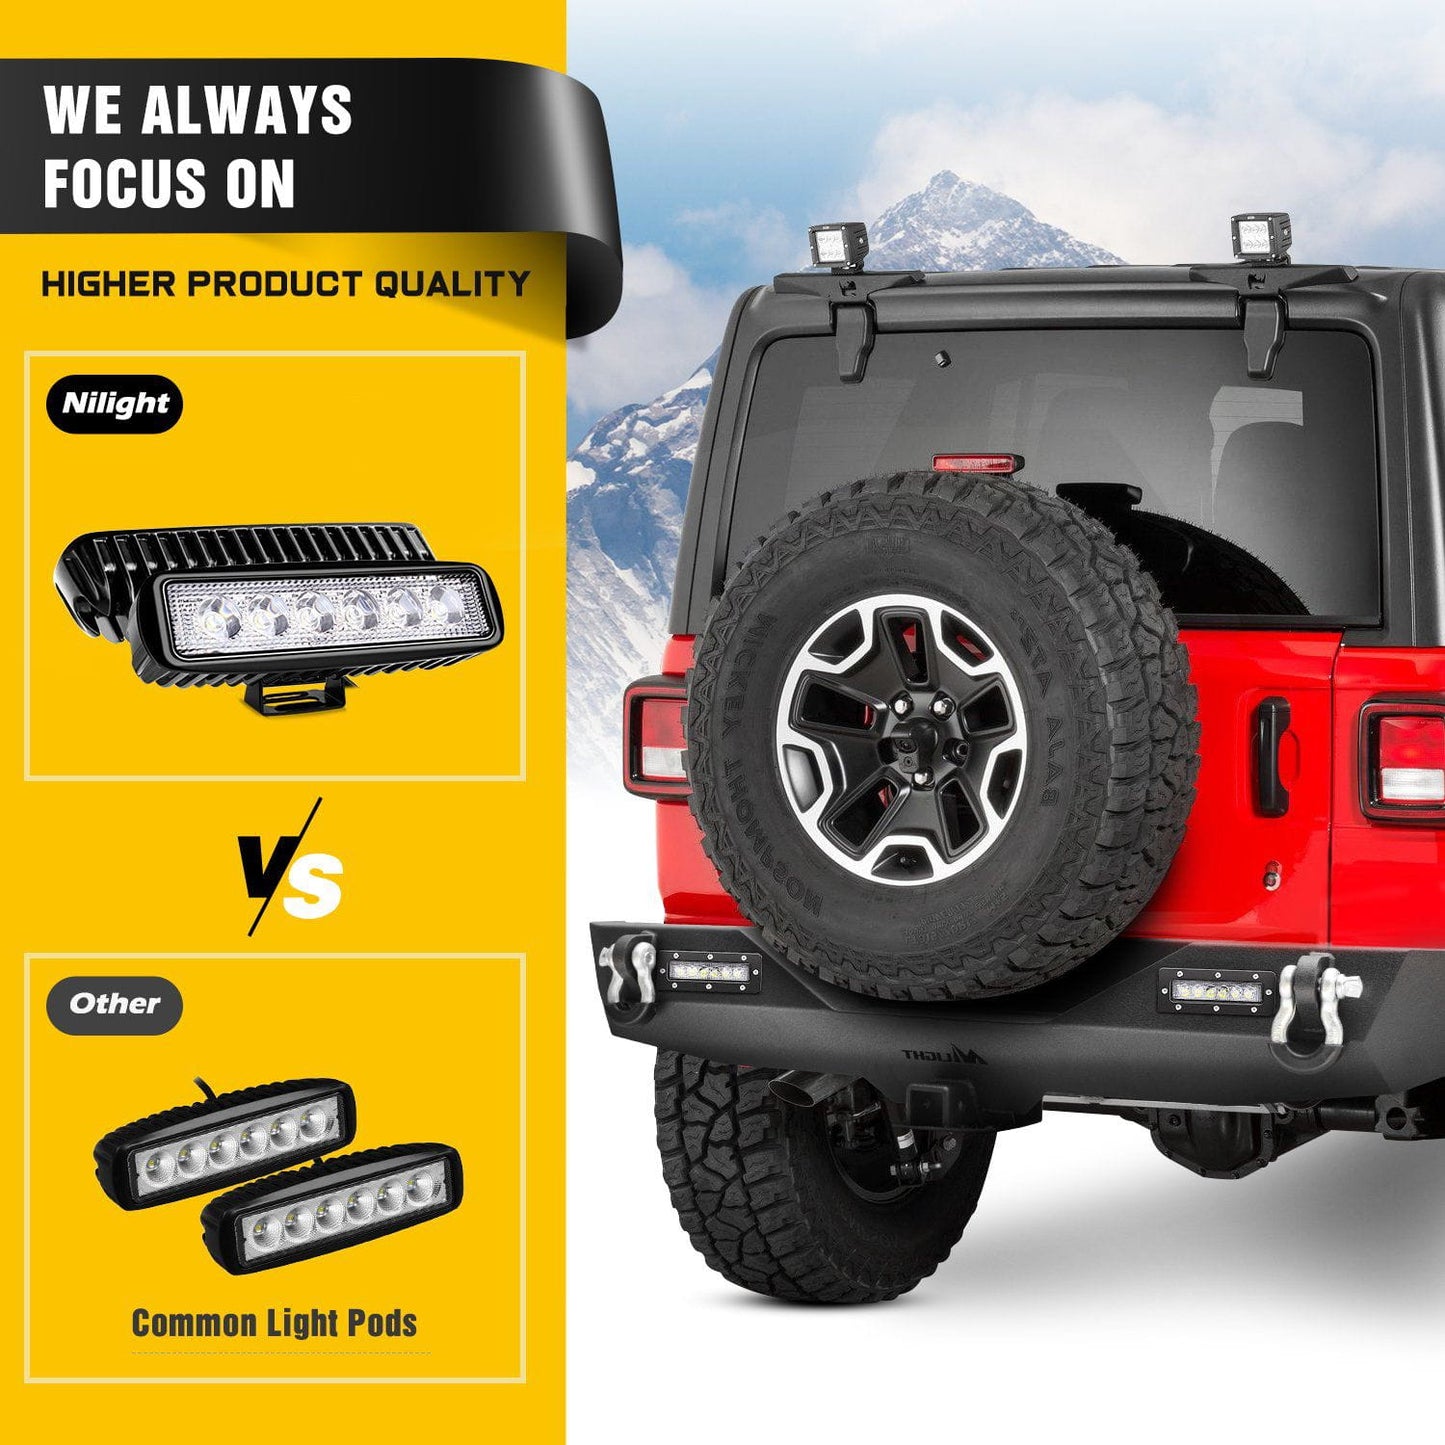 Higher product quality of Nilight Rear Bumper Kit for 2018-2019 Jeep Wrangler JL